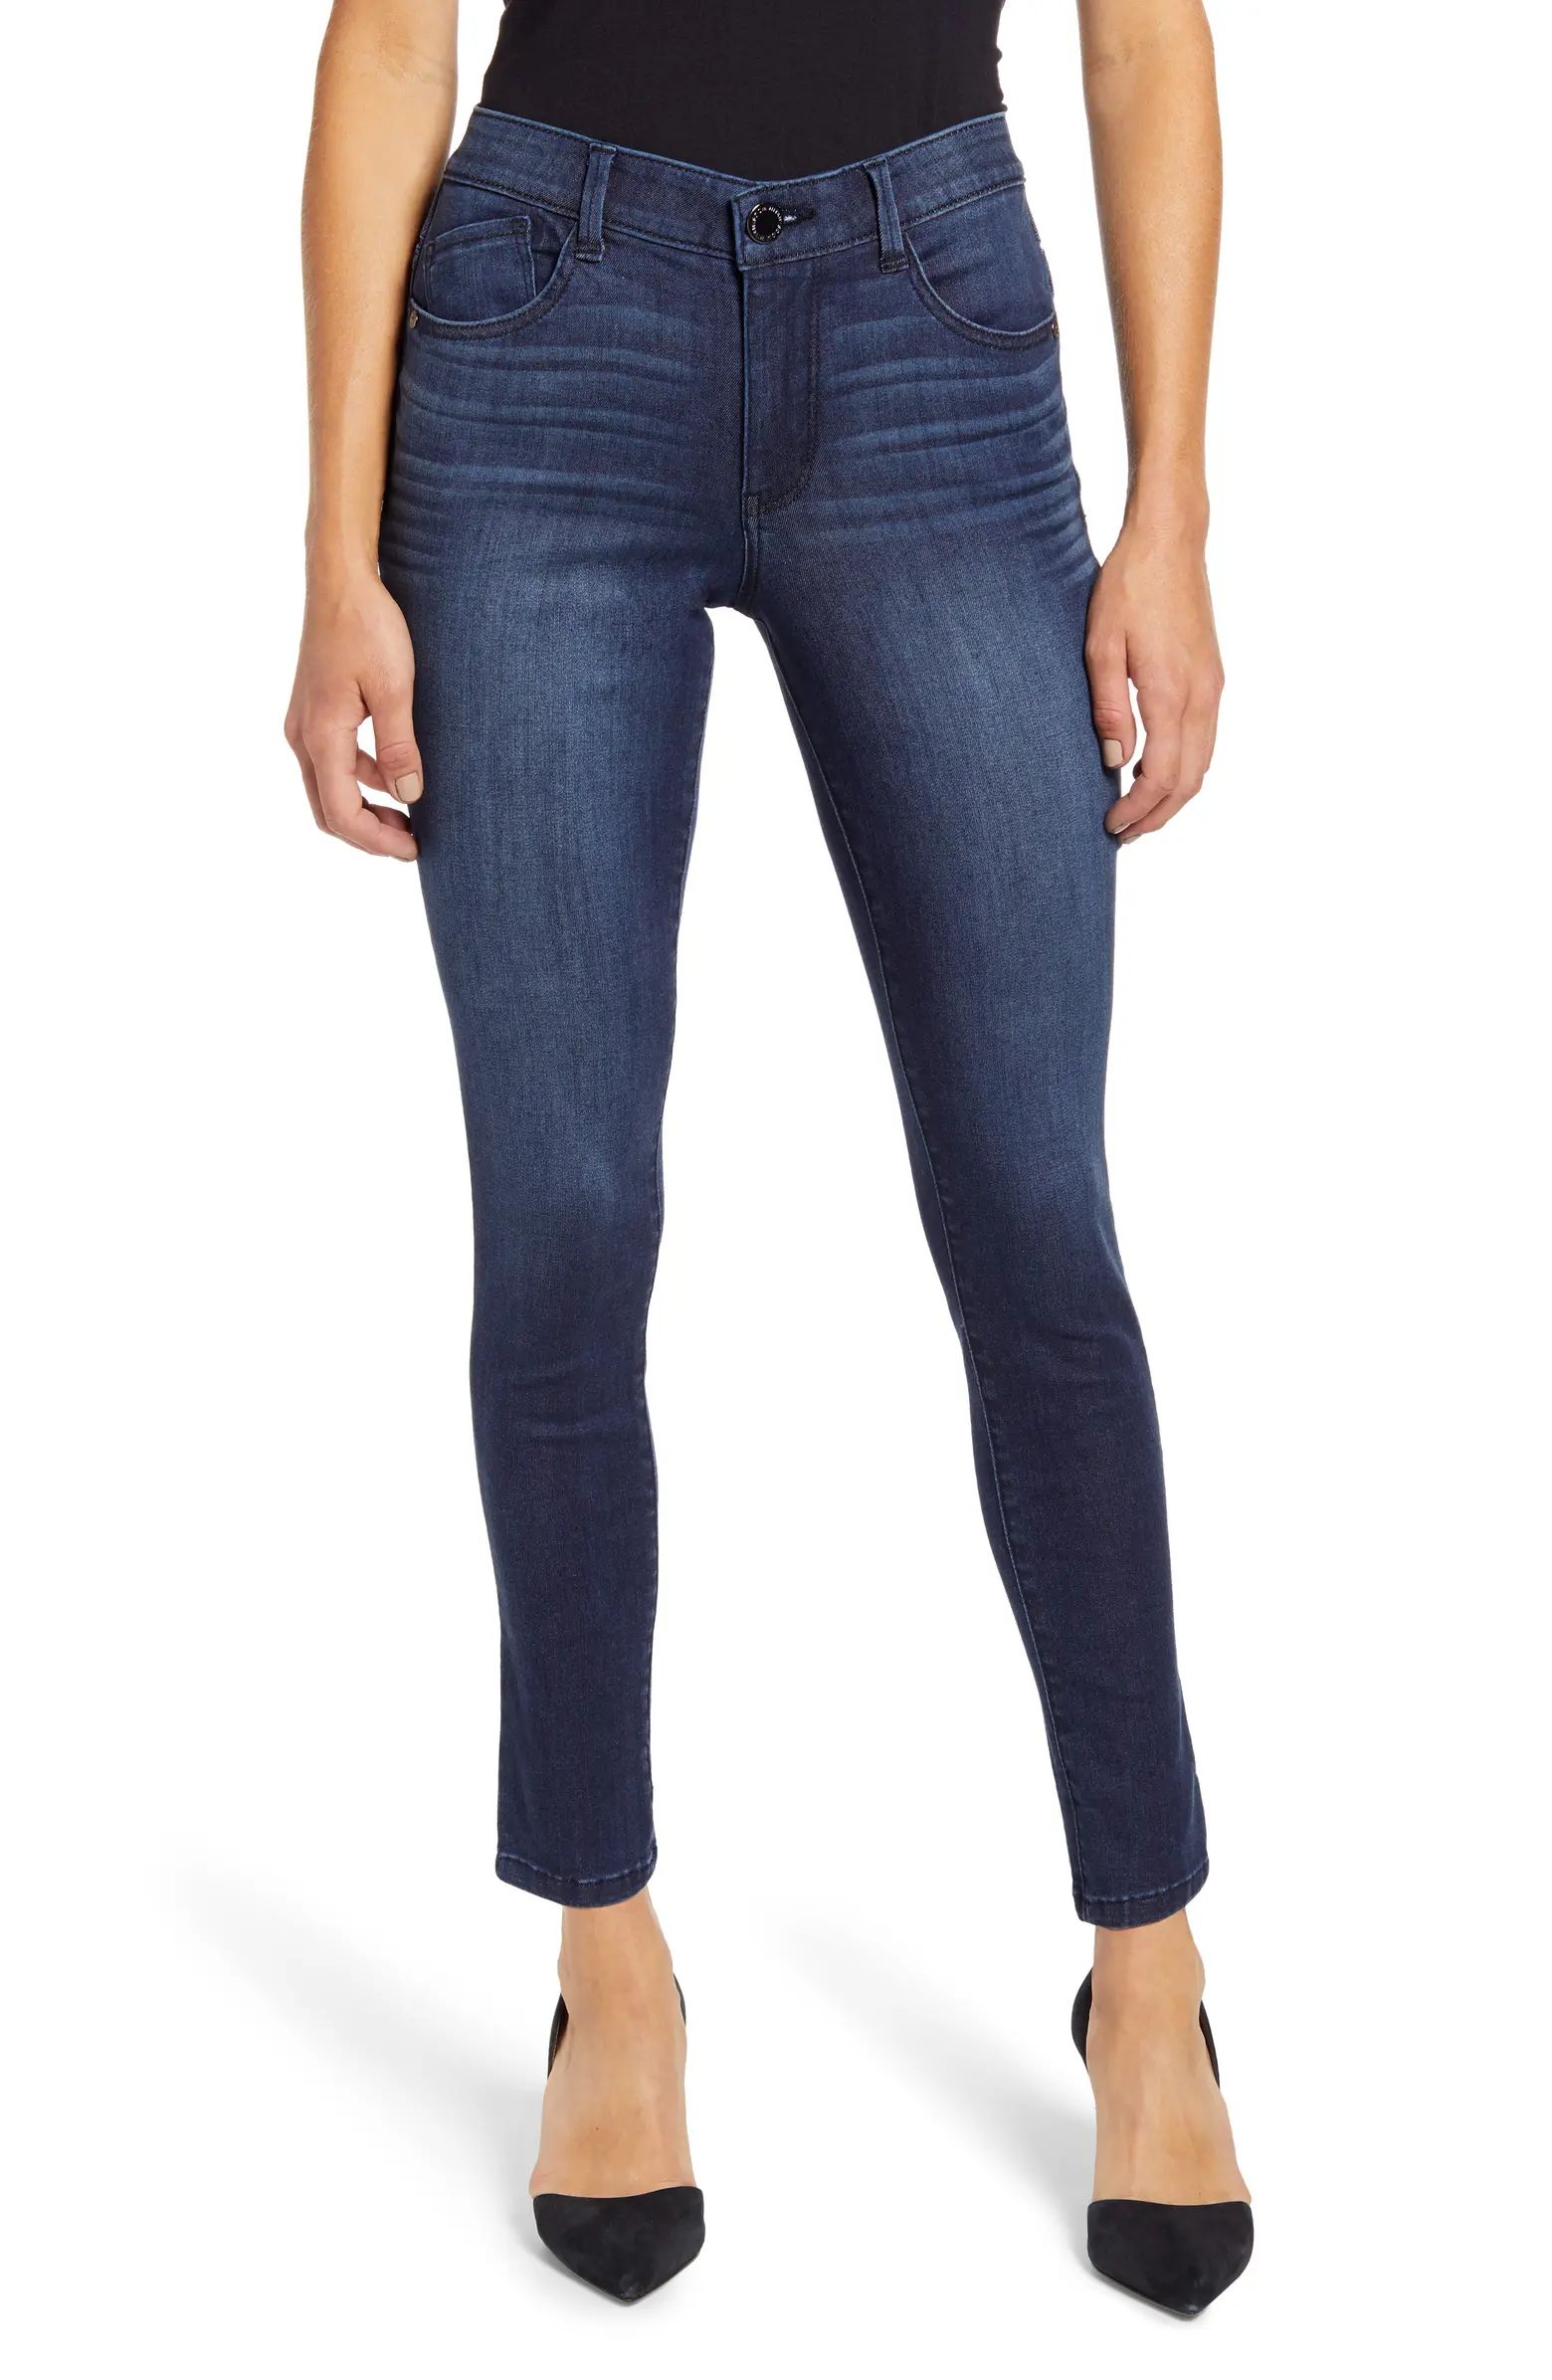 'Ab'Solution Luxe Touch High Waist Skinny Jeans | Nordstrom